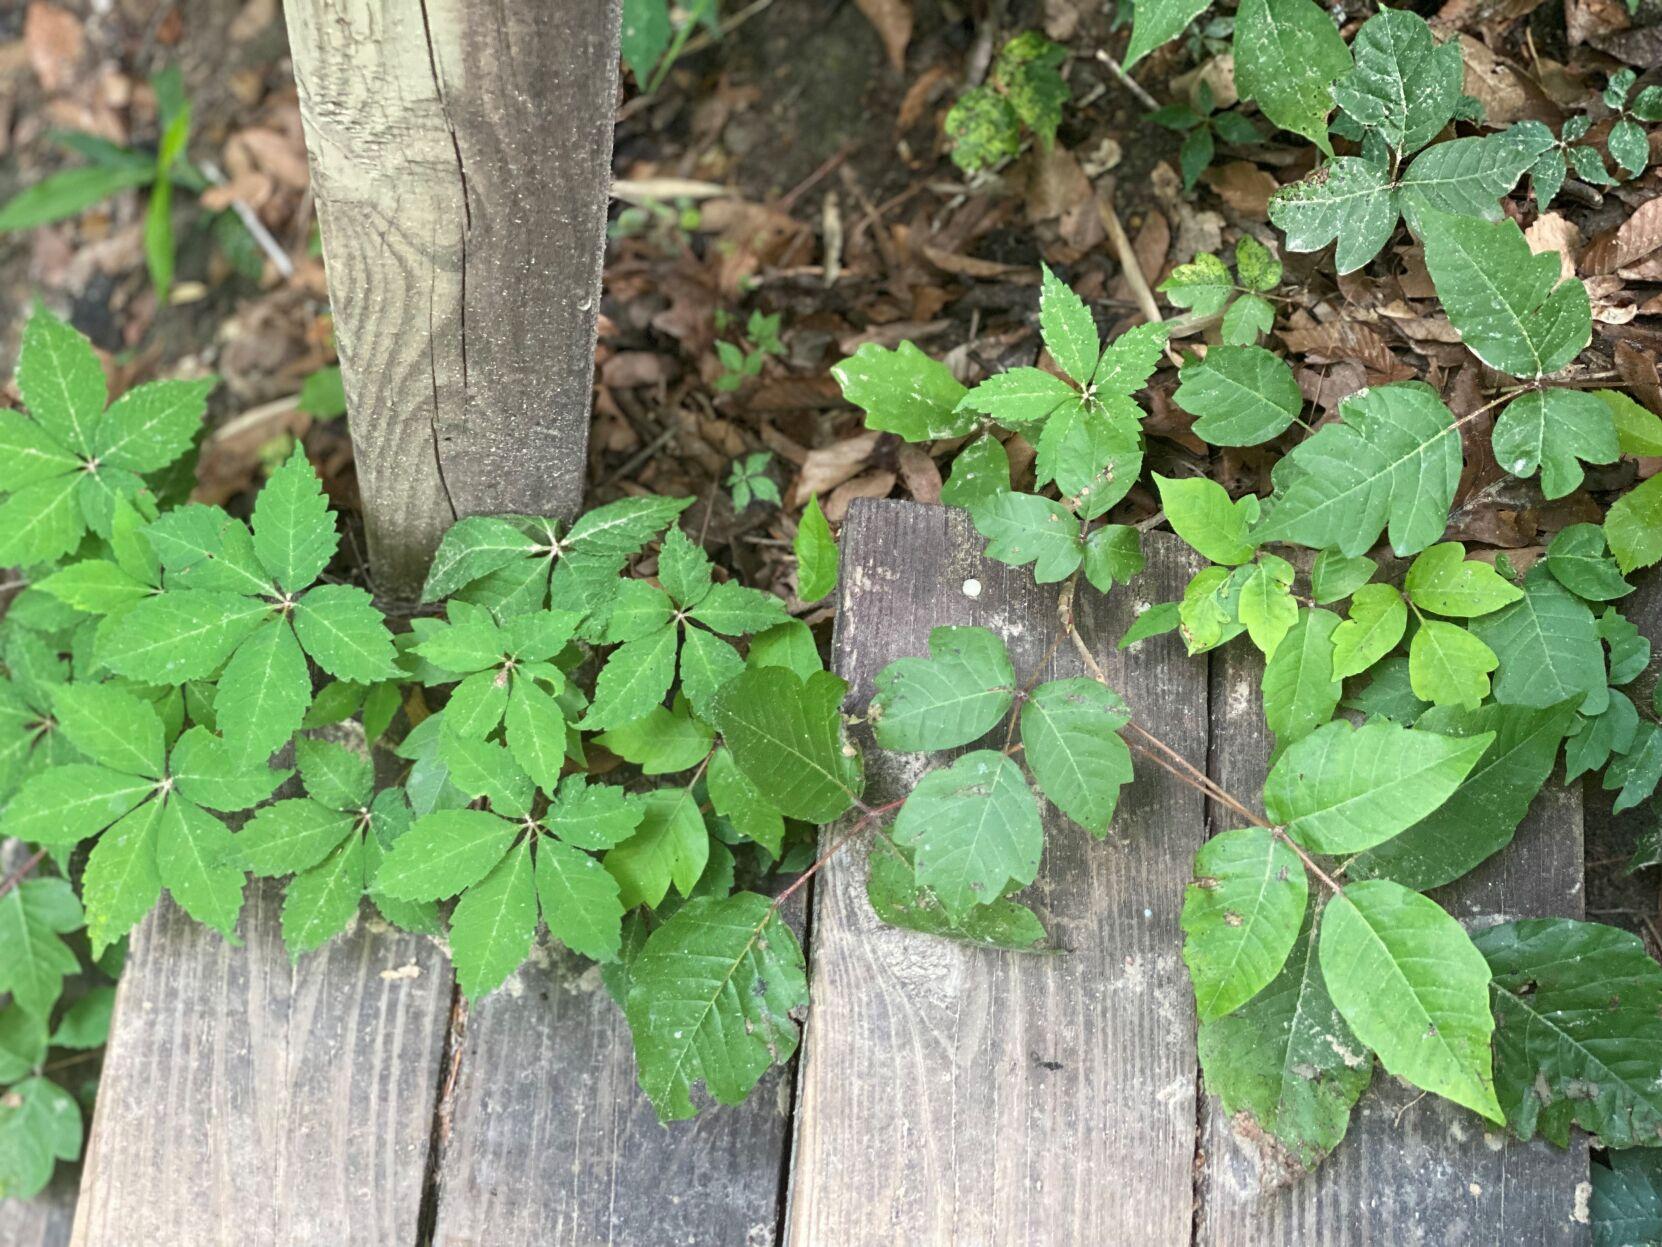 Here's how to identify poison ivy and remove it from your landscape